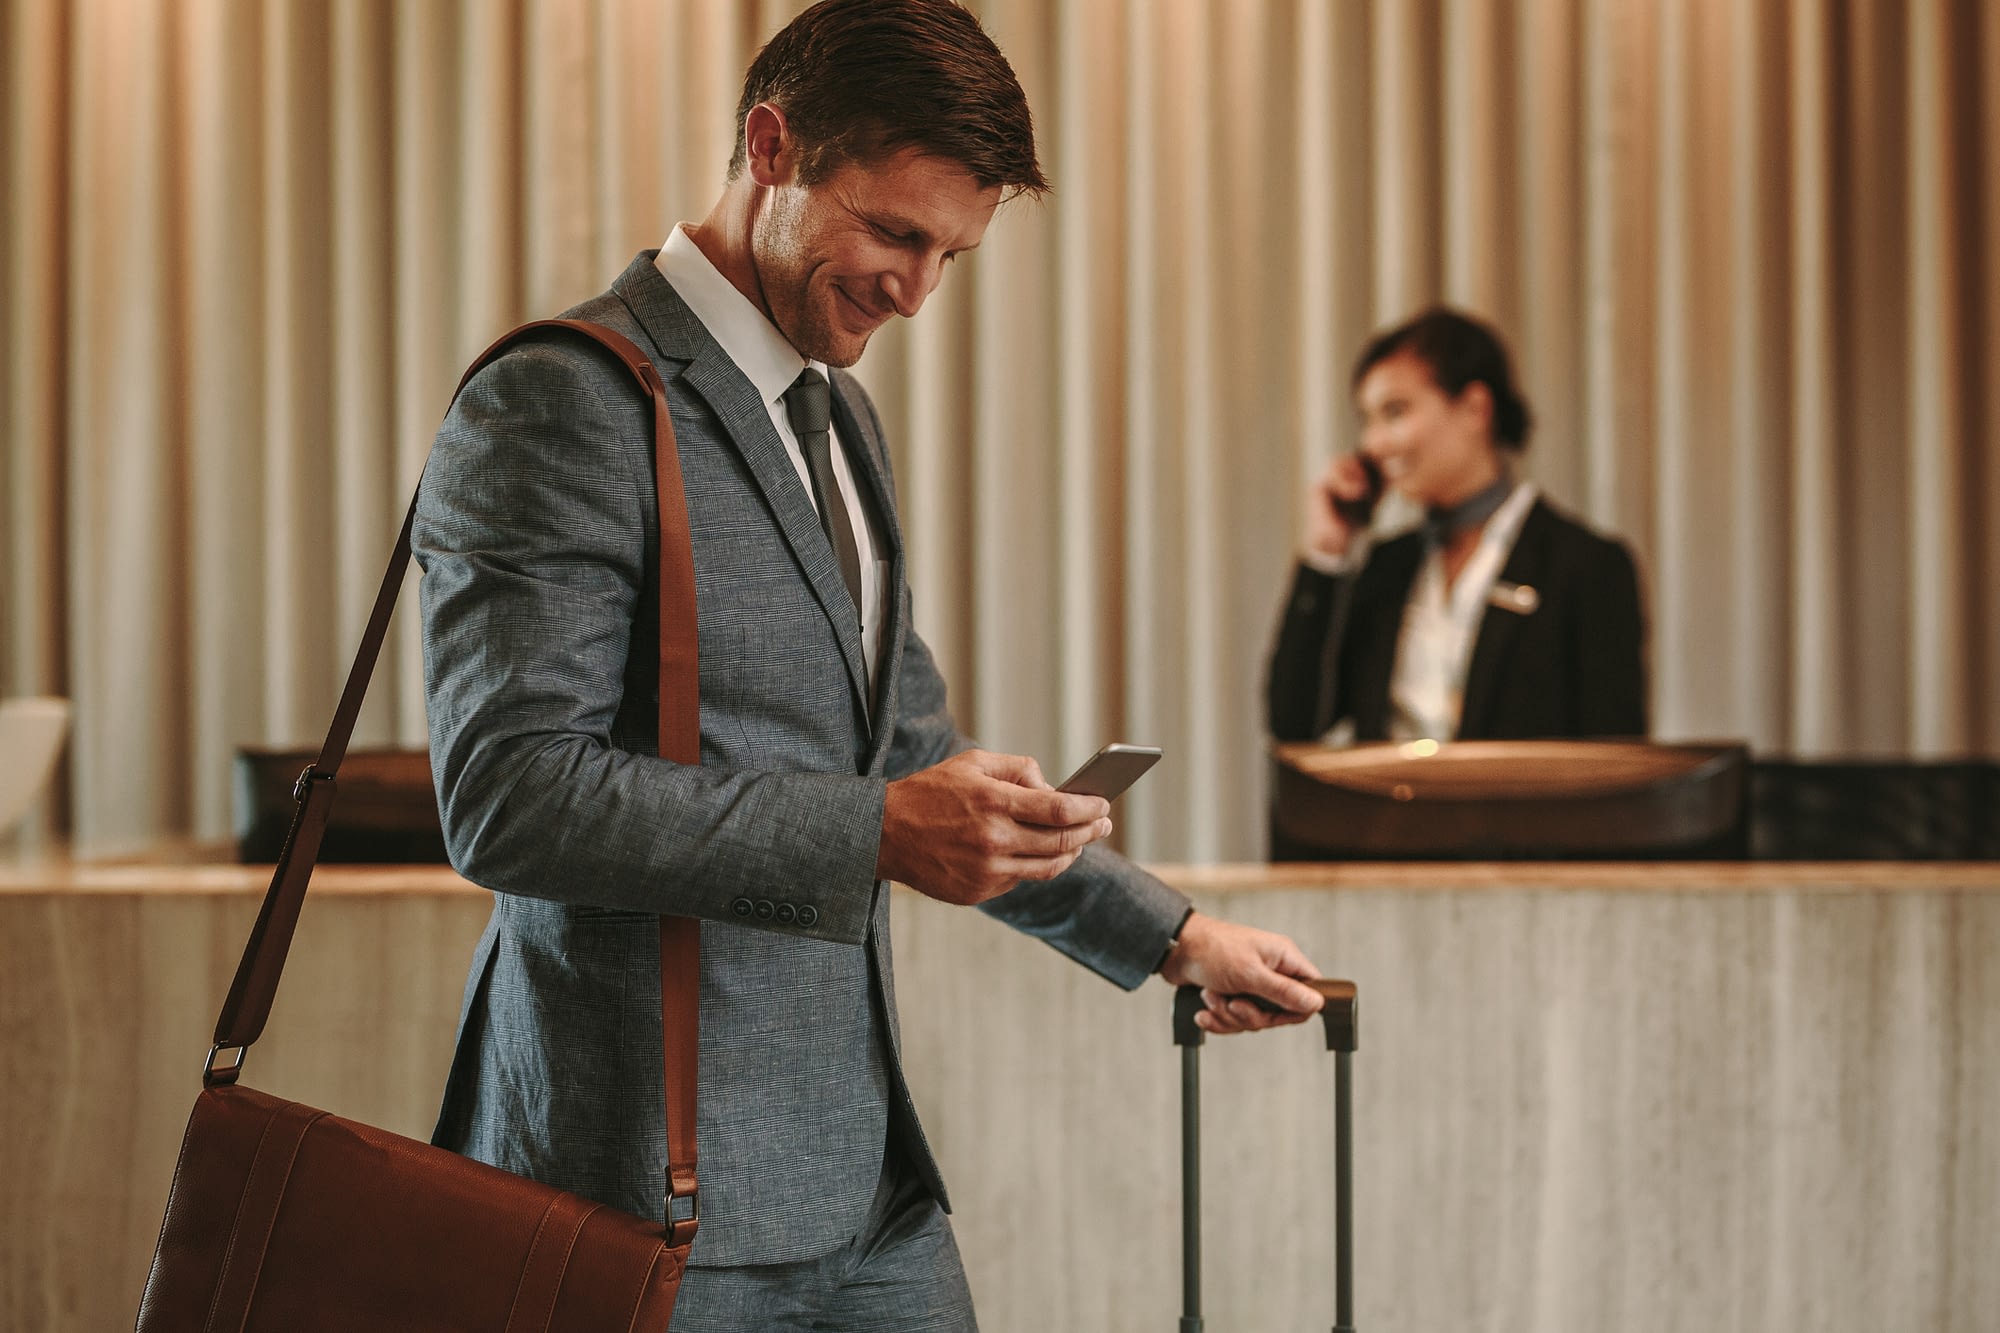 Happy hotel guest looking at phone in hotel lobby